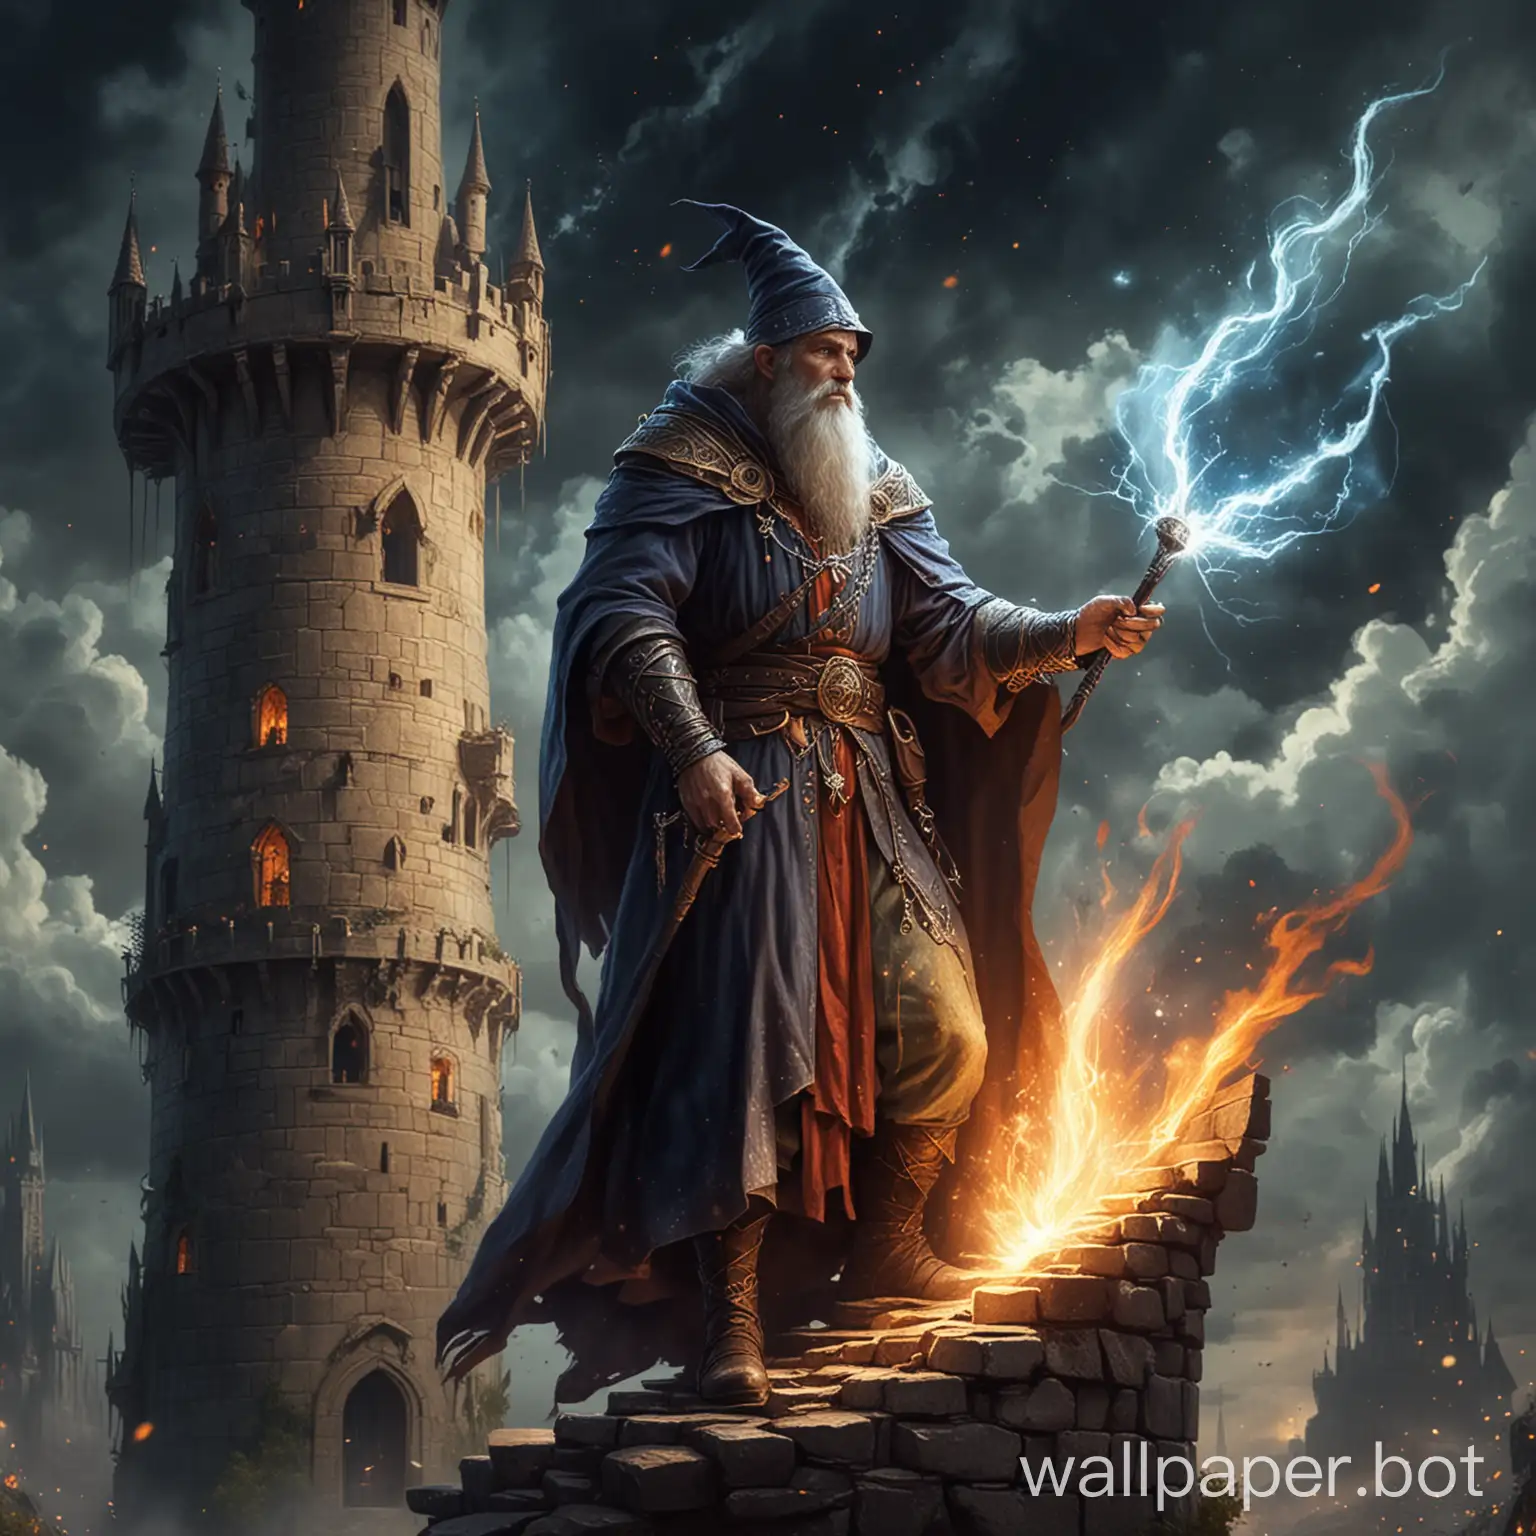 draw a fantasy wizard man who possesses very strong magic, in a tower, to which the king came